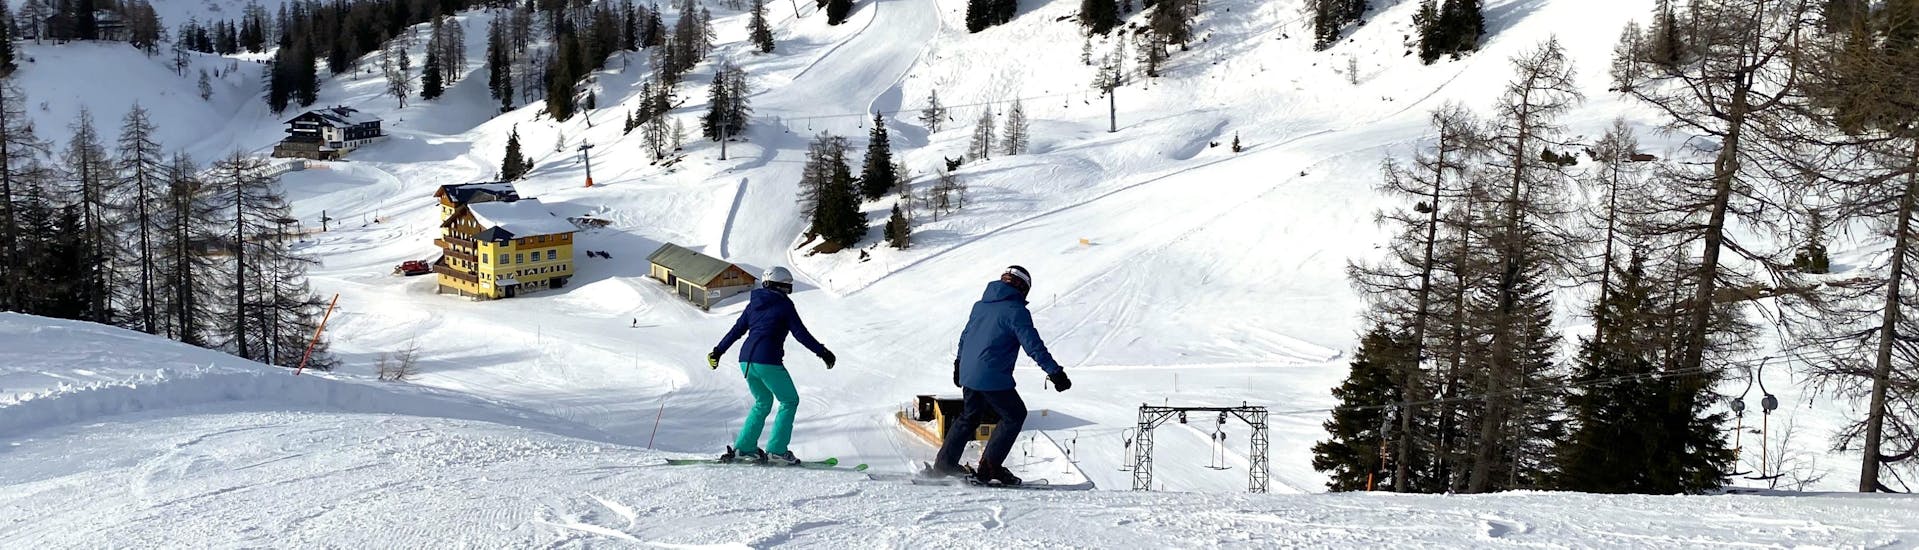 Two participants of a course from Gipfelmomente Tauplitz are enjoying a descent on the snow in Tauplitz.